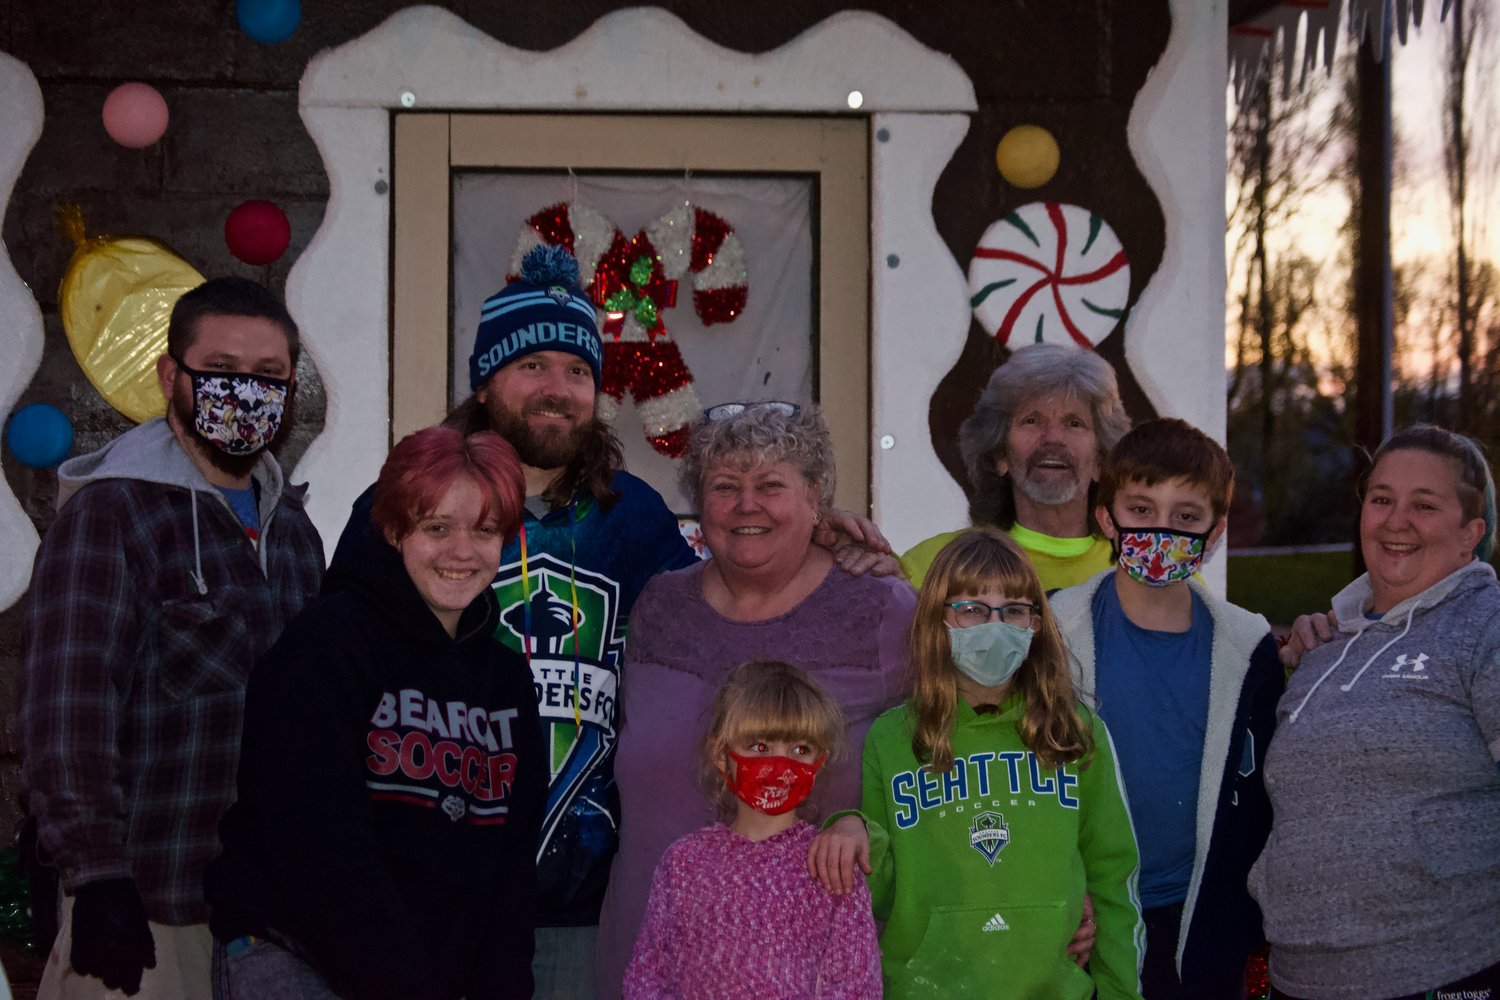 Chehalis City Councilor Terry Harris smiles with friends and family for a photo outside the gingerbread house in Chehalis on Saturday evening.